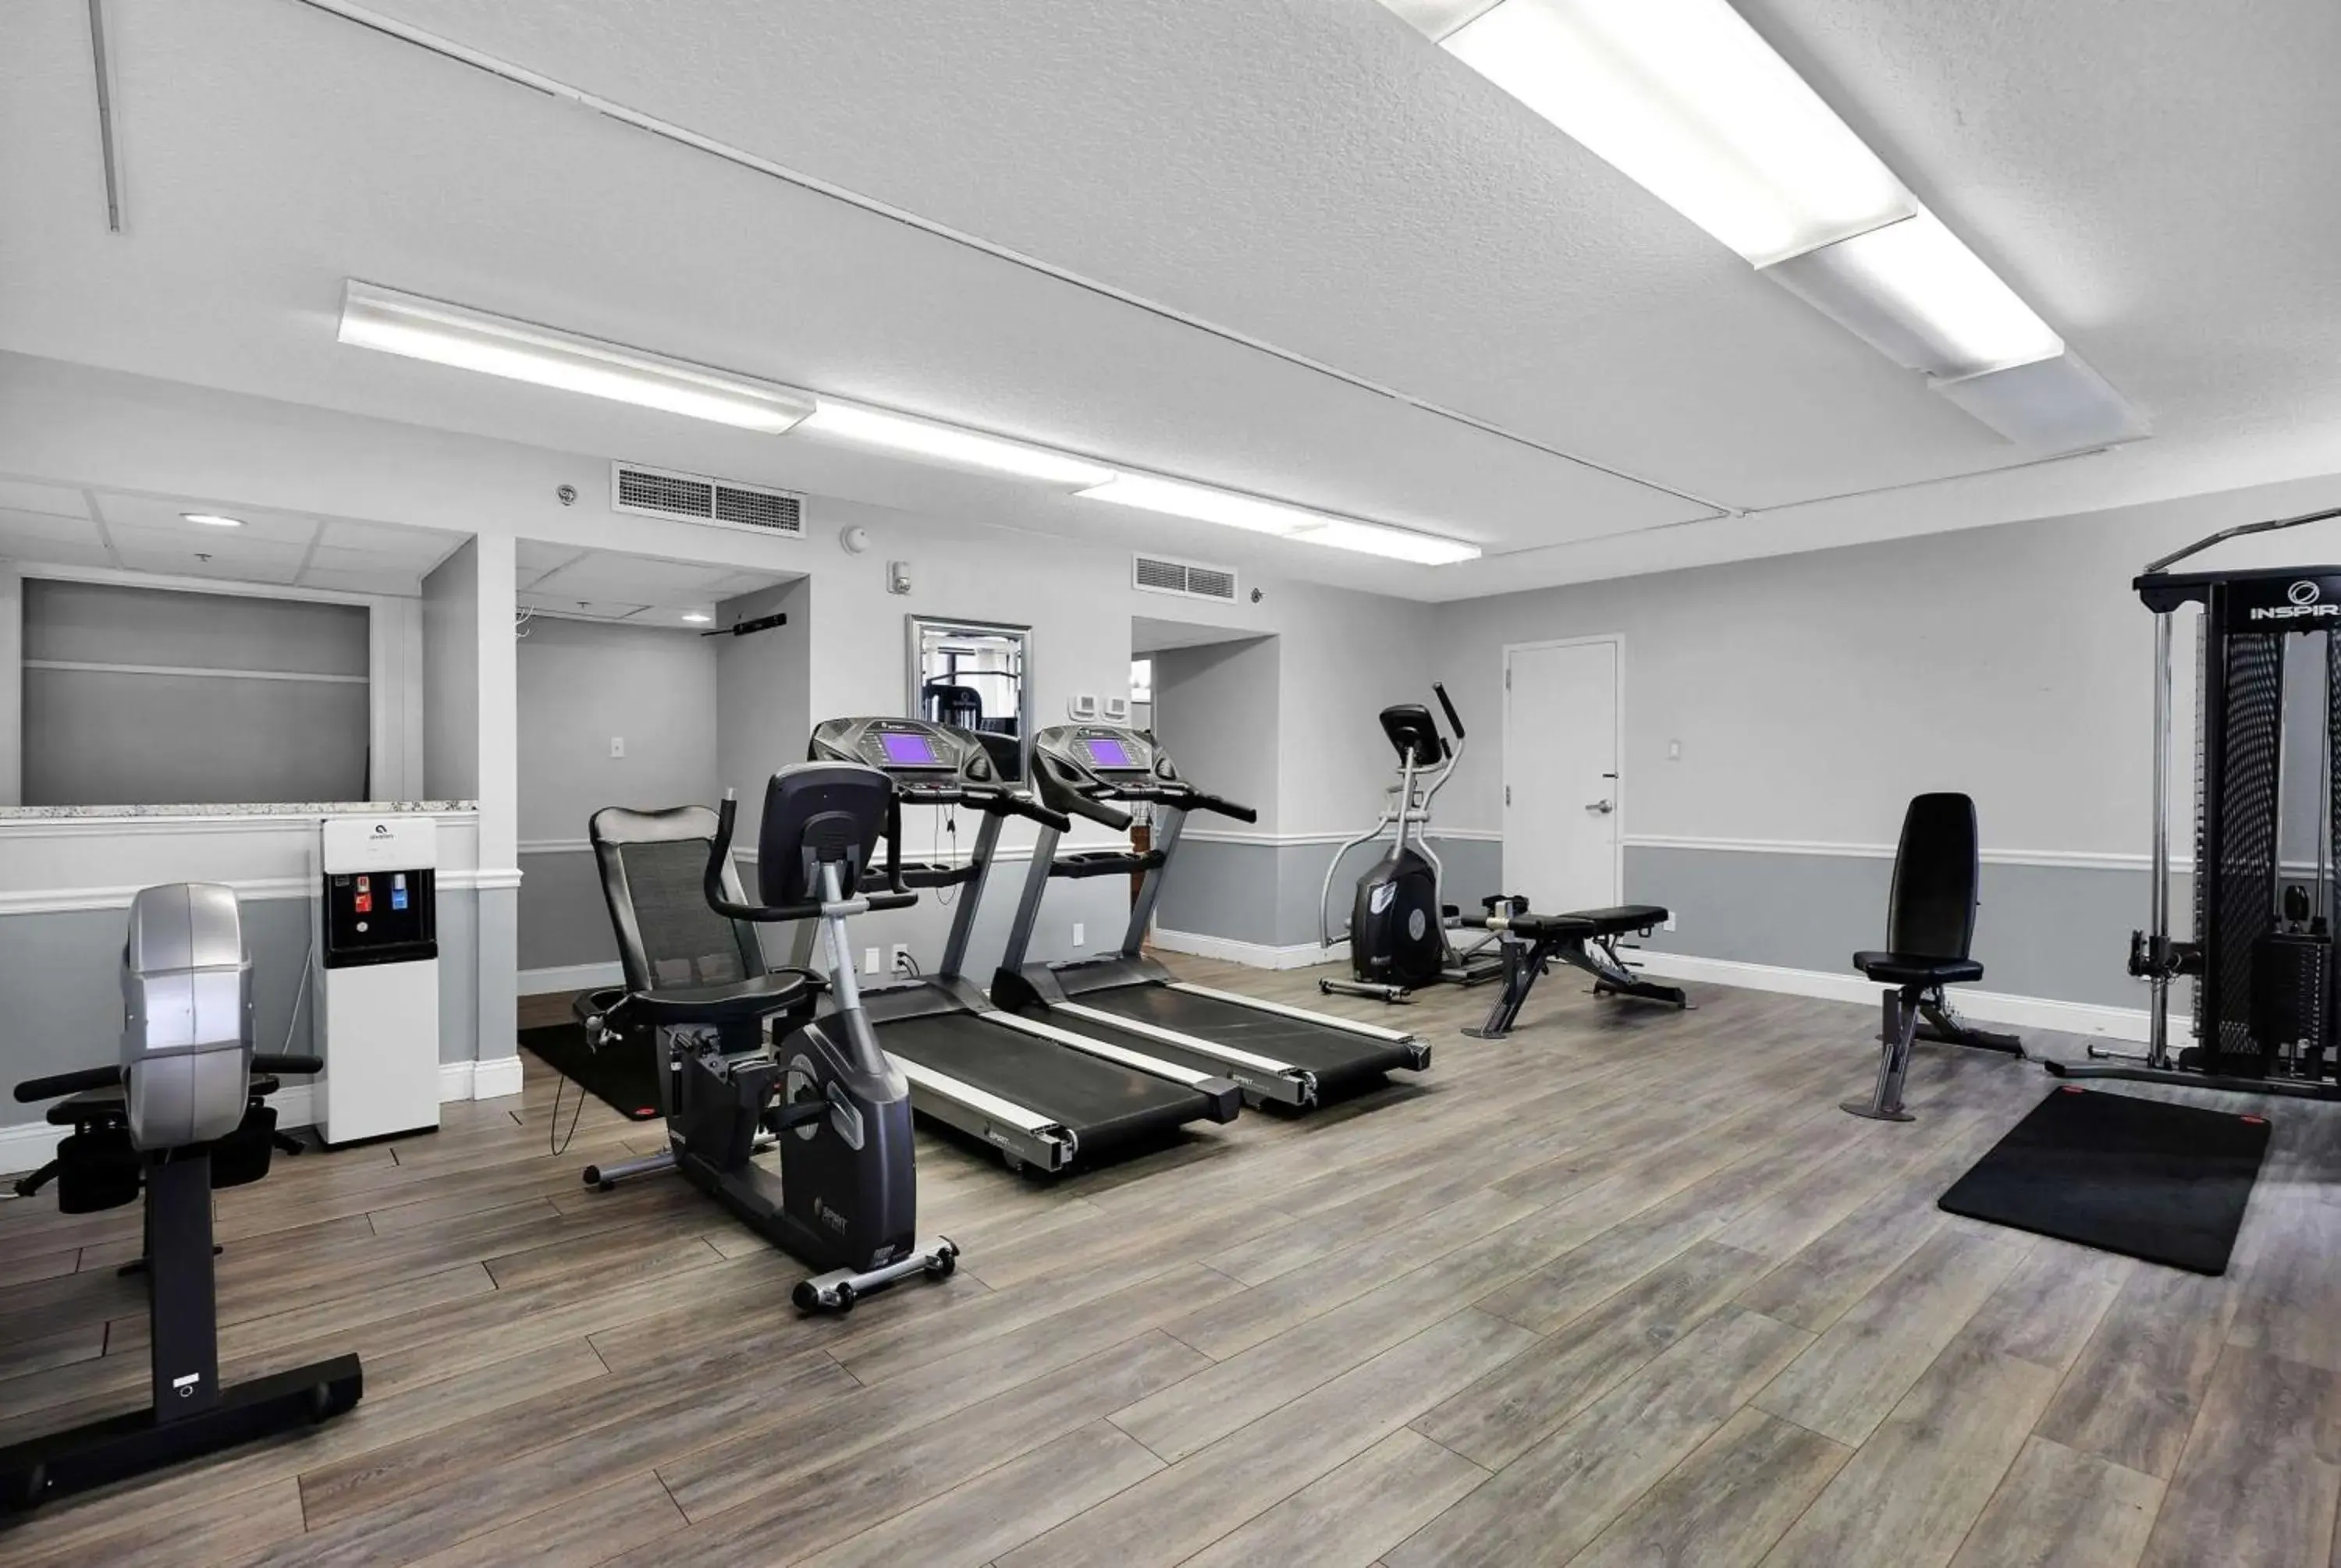 Fitness centre/facilities, Fitness Center/Facilities in Ramada by Wyndham Jacksonville I-95 by Butler Blvd